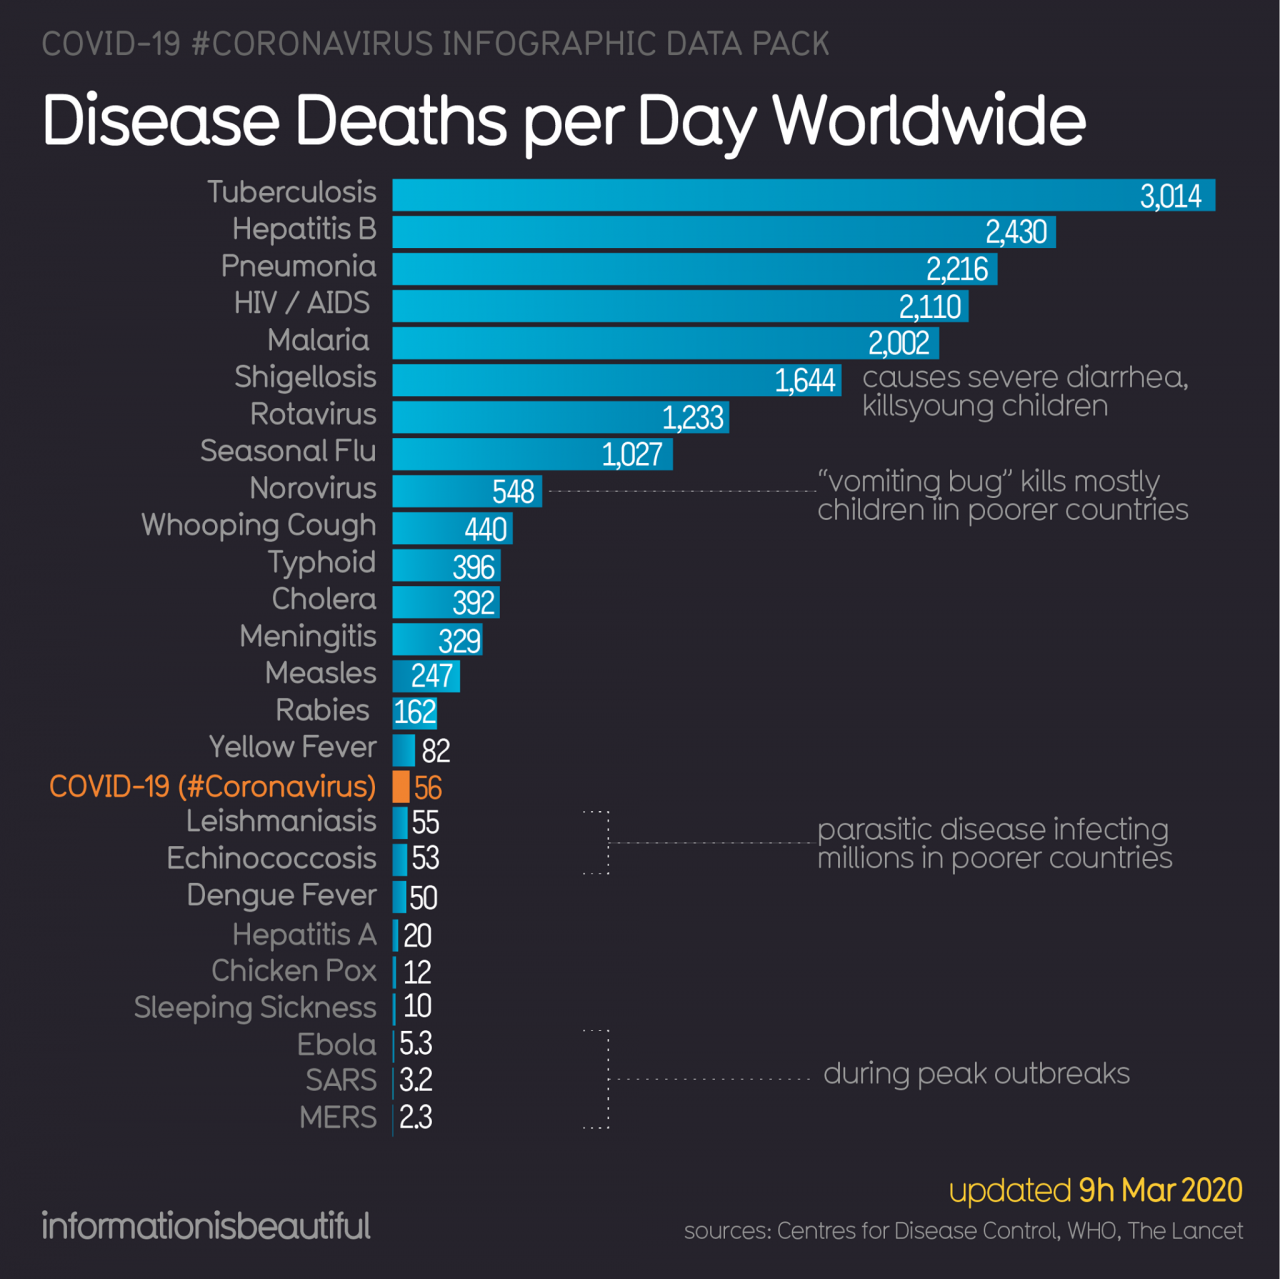 Current <a class="bx-tag" rel="tag" href="https://streetloc.com/view-channel-profile/coronavirus"><s>#</s><b>coronavirus</b></a> deaths per day (this number will likely increase as the epidemic grows).